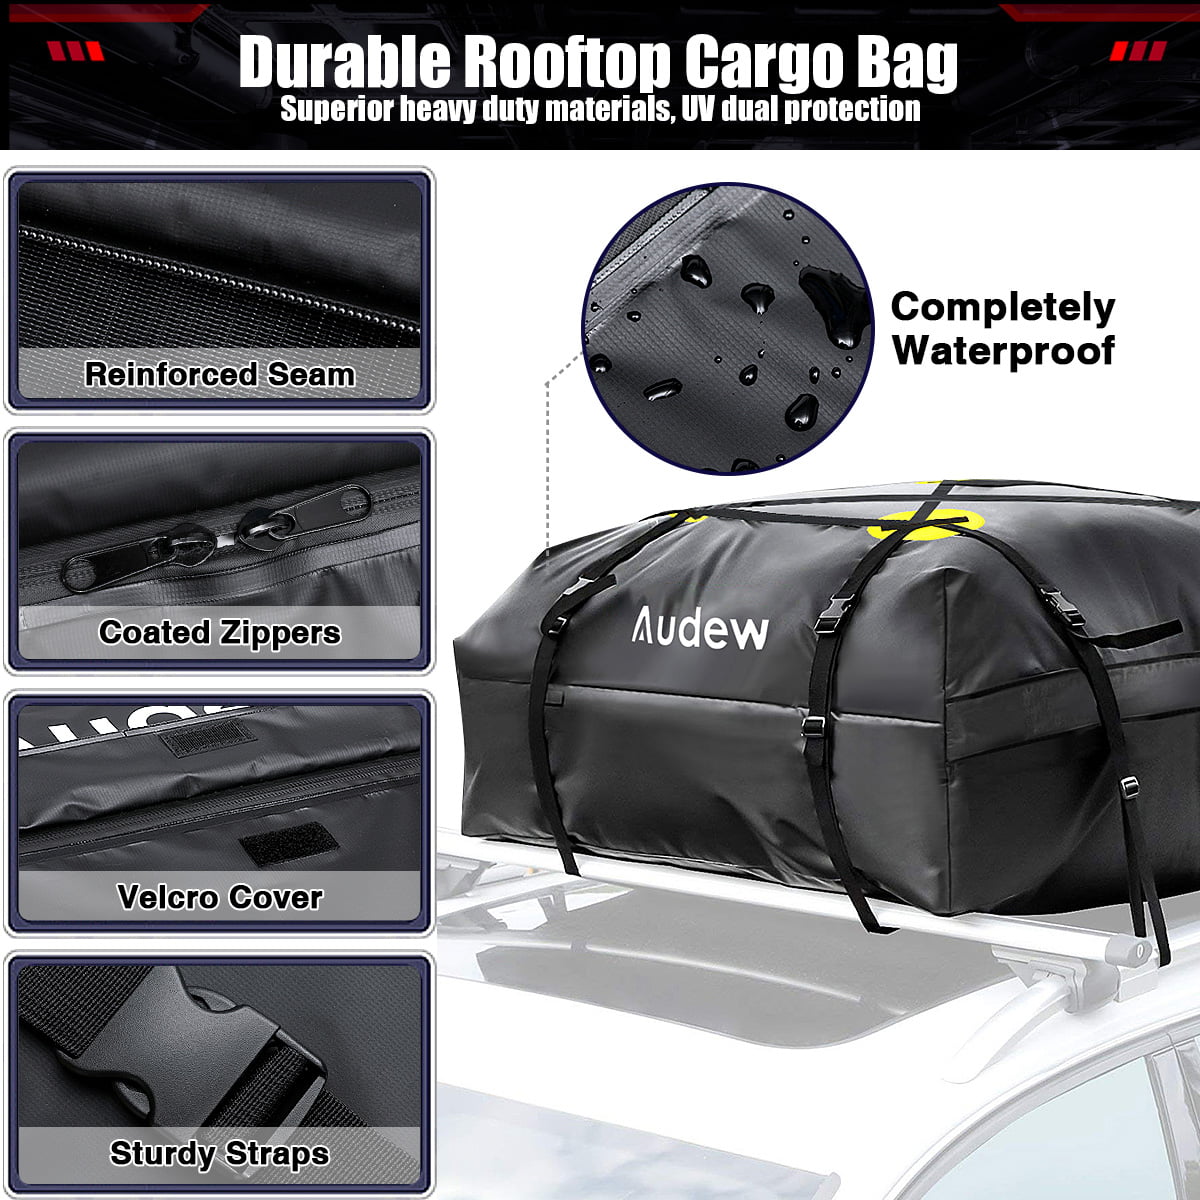 Vehicle Cargo Pack Bag Storage Box For Travel And Luggage Transport Sanmubo Car Roof Bag Heavy Duty Roof Top Luggage Bag Waterproof Cargo Top Package Black Vans Cars 600D Cargo Carrier 